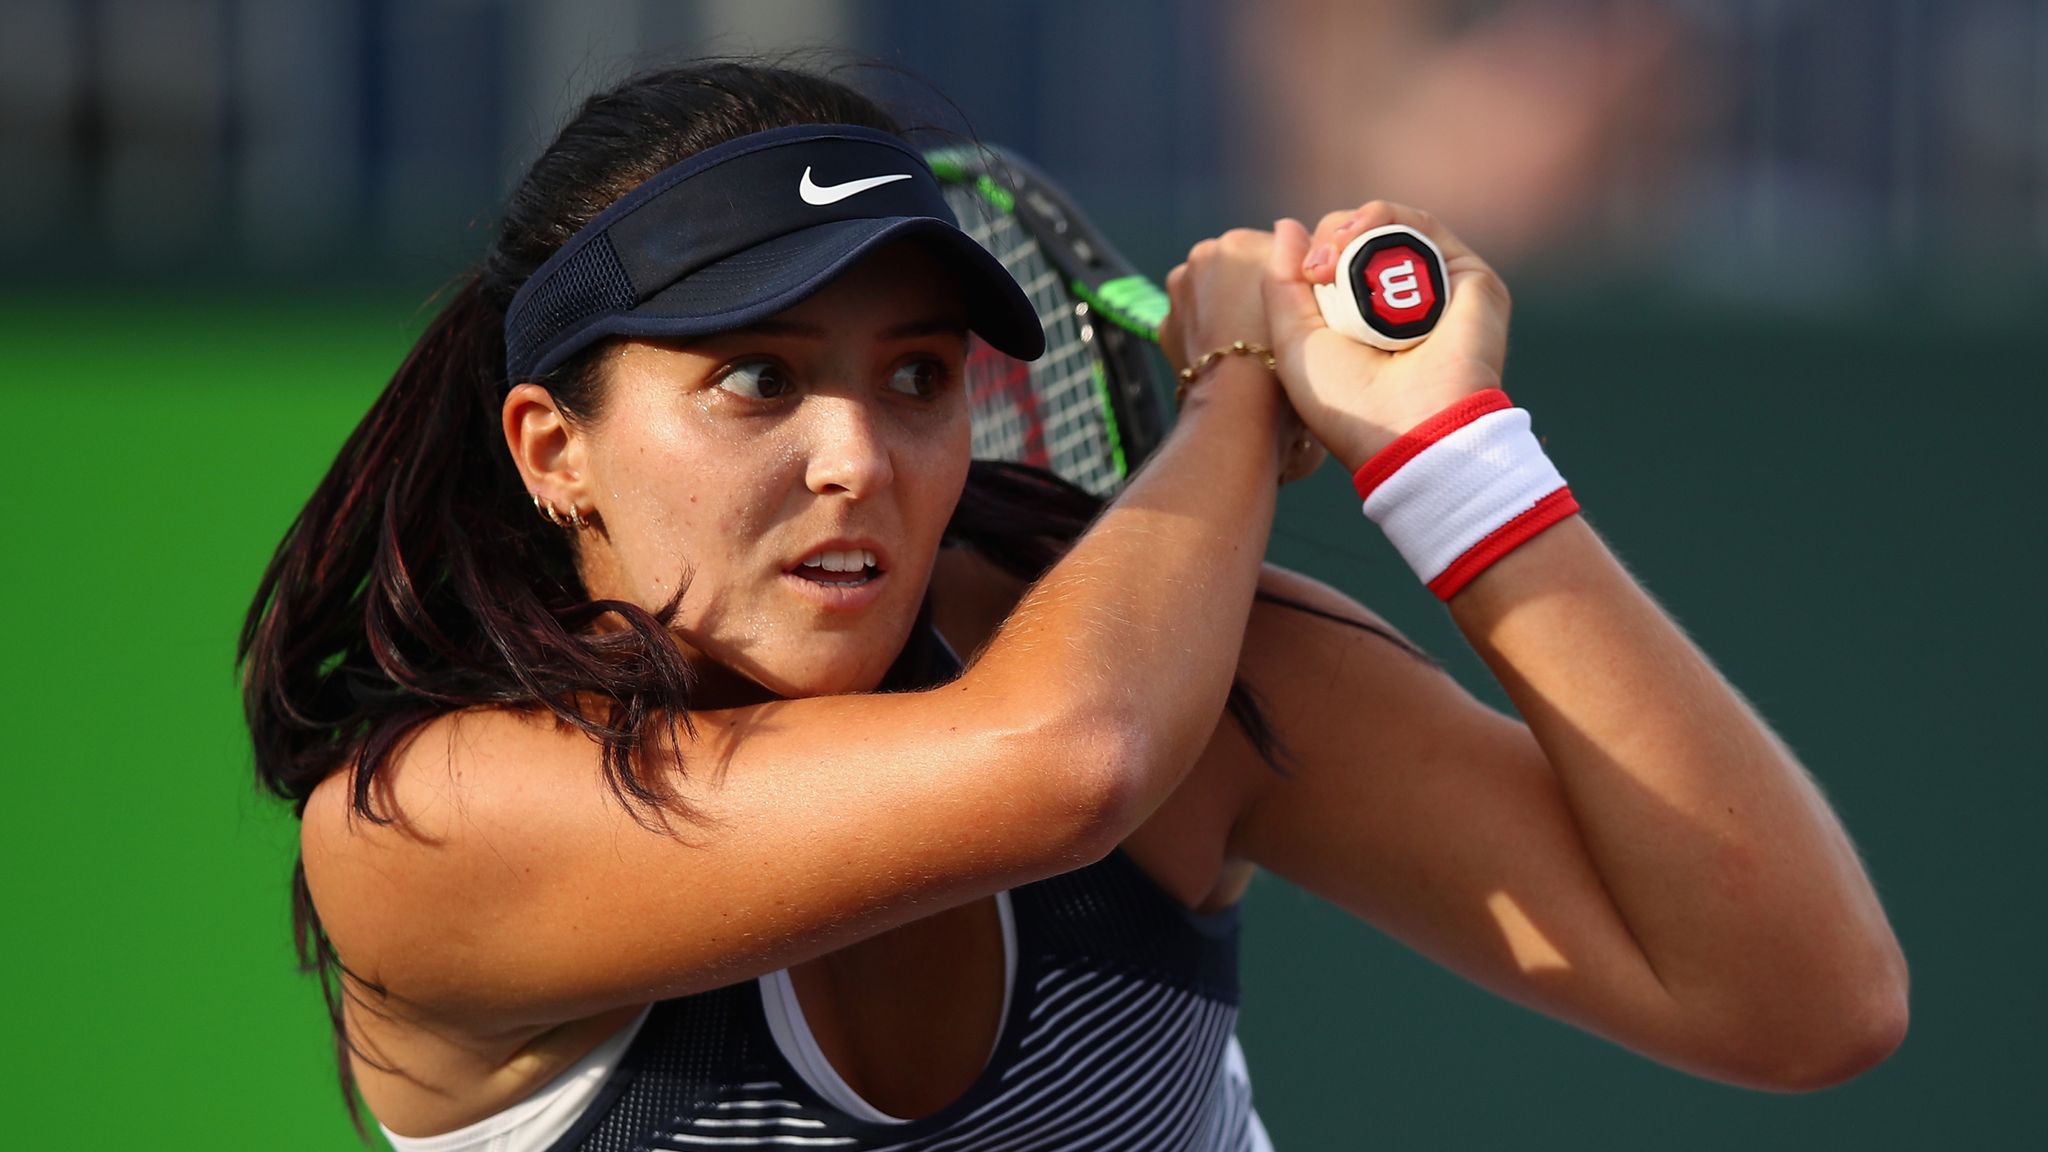 Laura Robson Run Ends With Defeat By Timea Babos In Morocco Tennis News Sky Sports